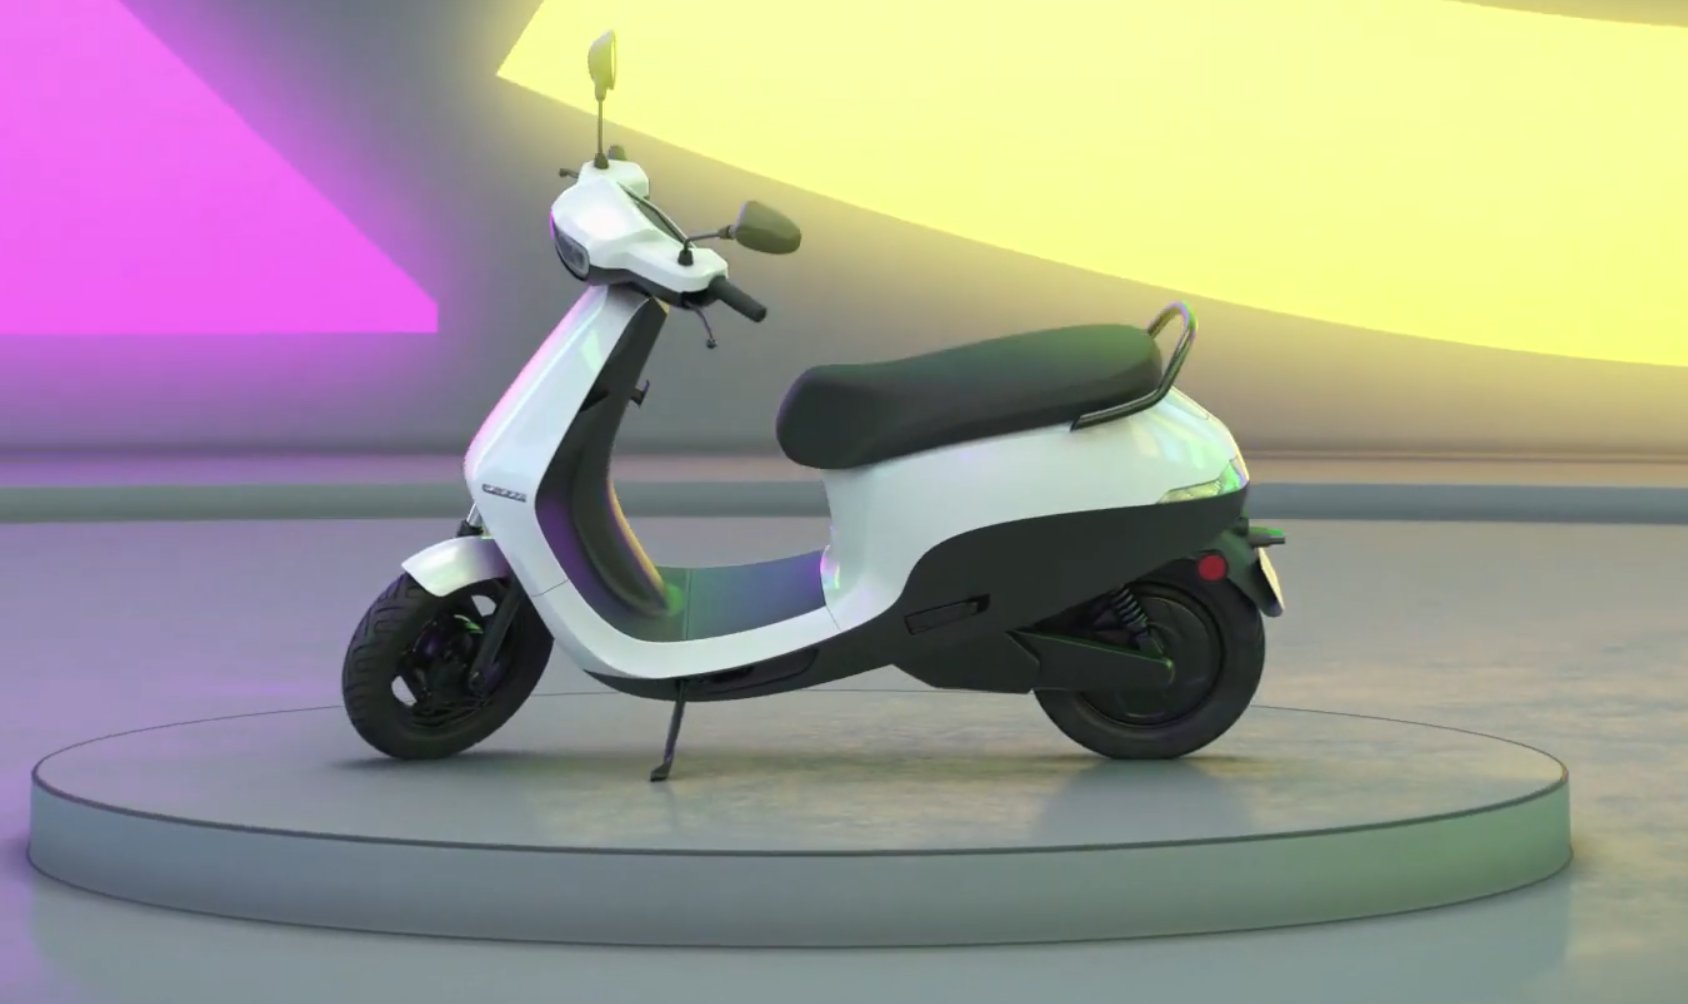 Ola S1 Air Electric scooter